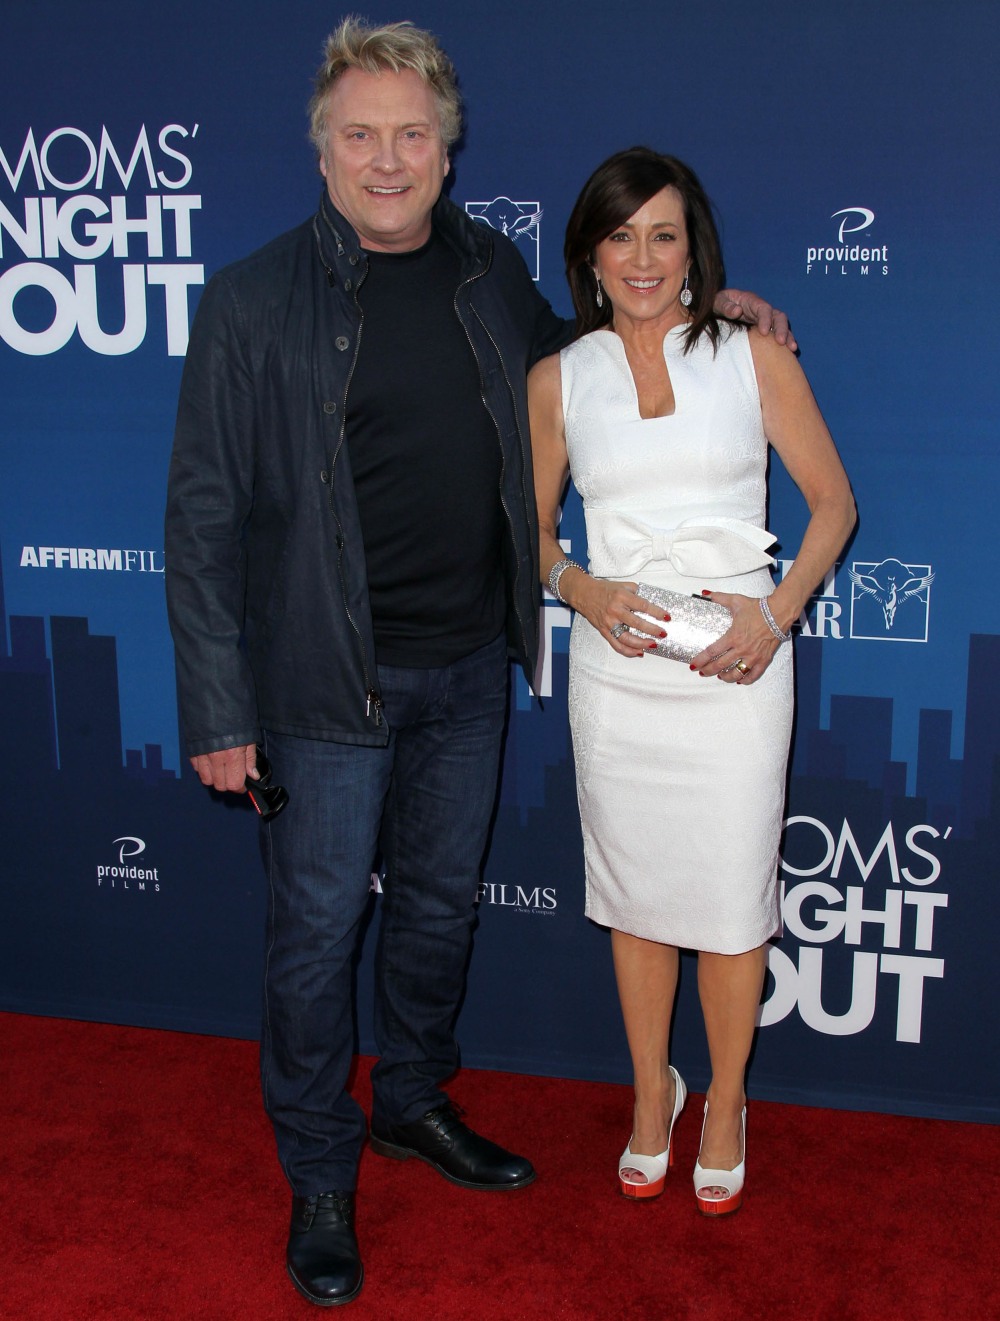 Premiere of 'Mom's Night Out' - Arrivals